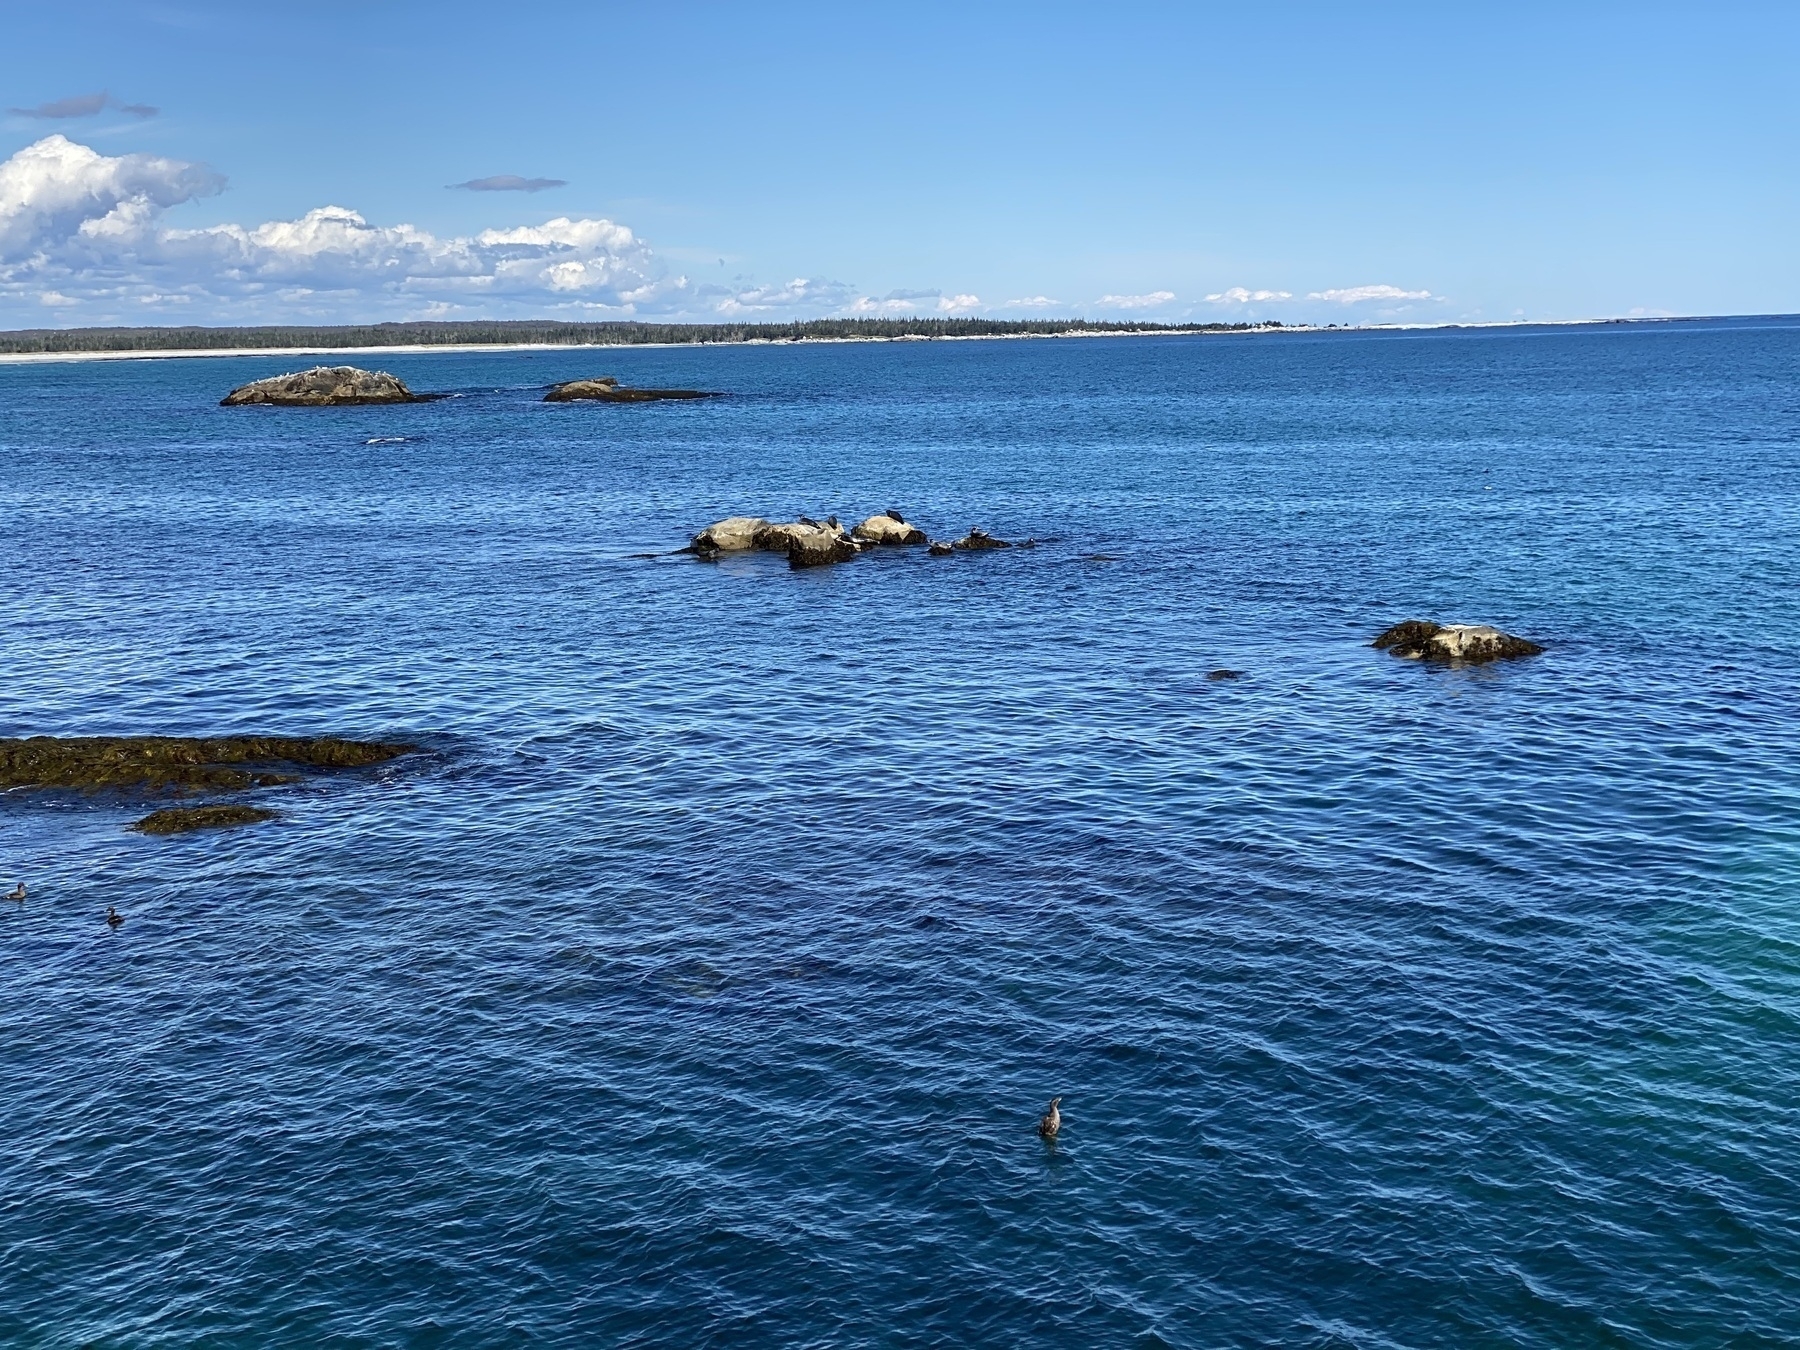 Ocean with rocks in the distance with seals resting on them and a bird in the water in the foreground.